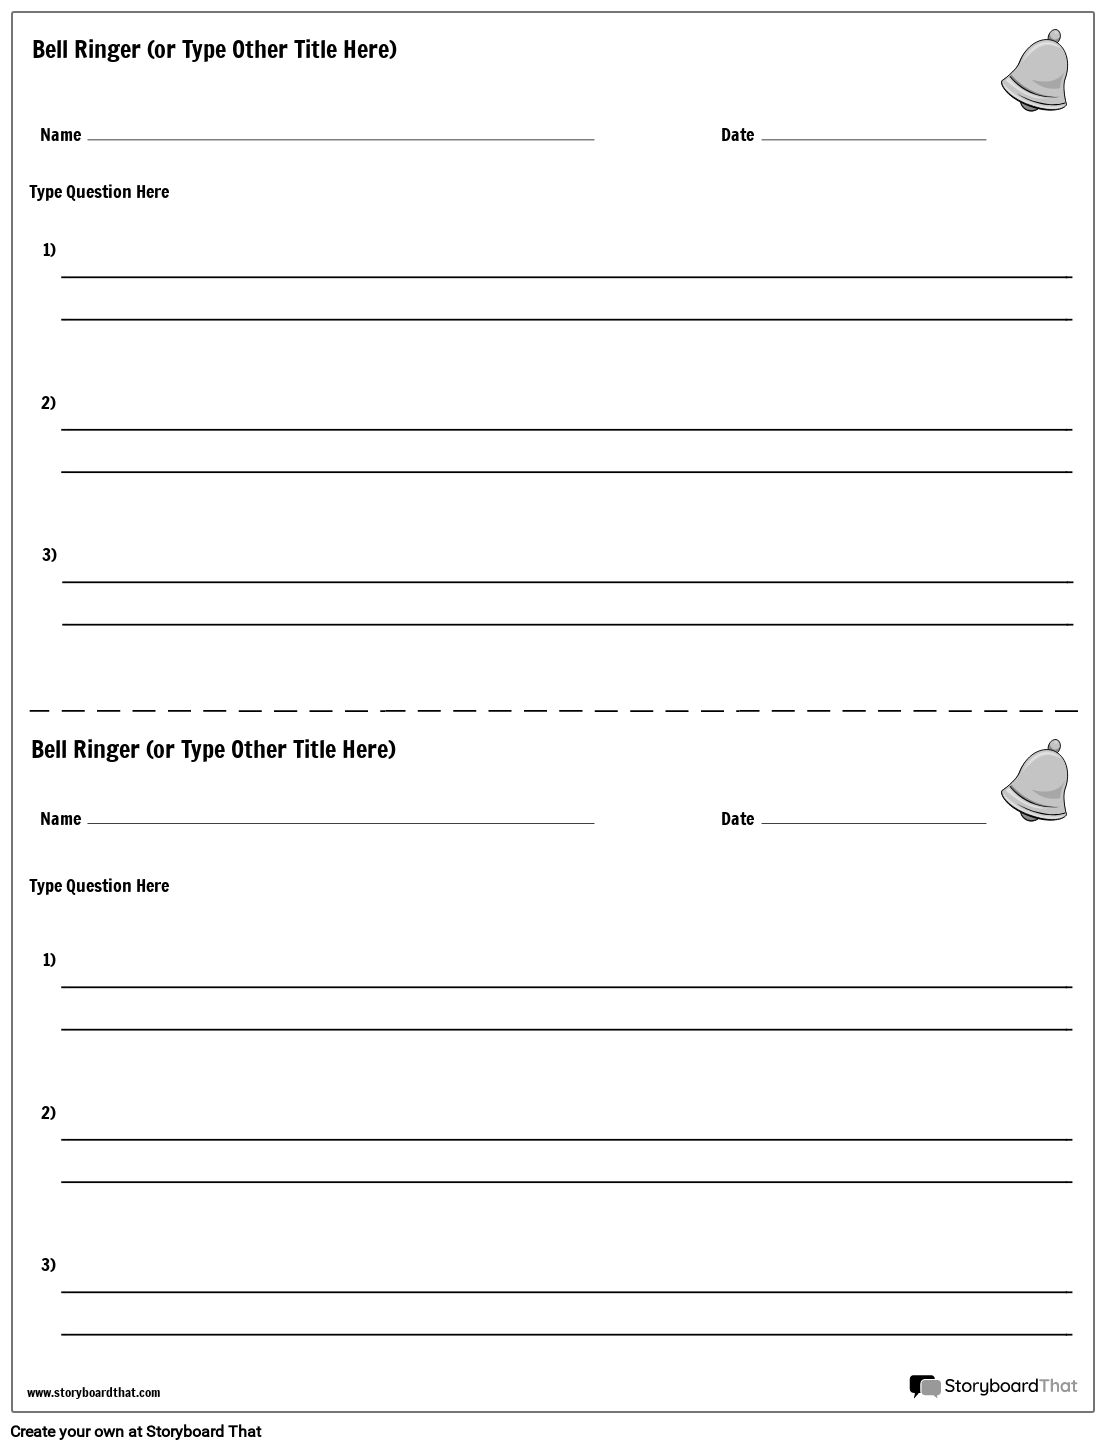 3 Questions Bell Ringer Template Design